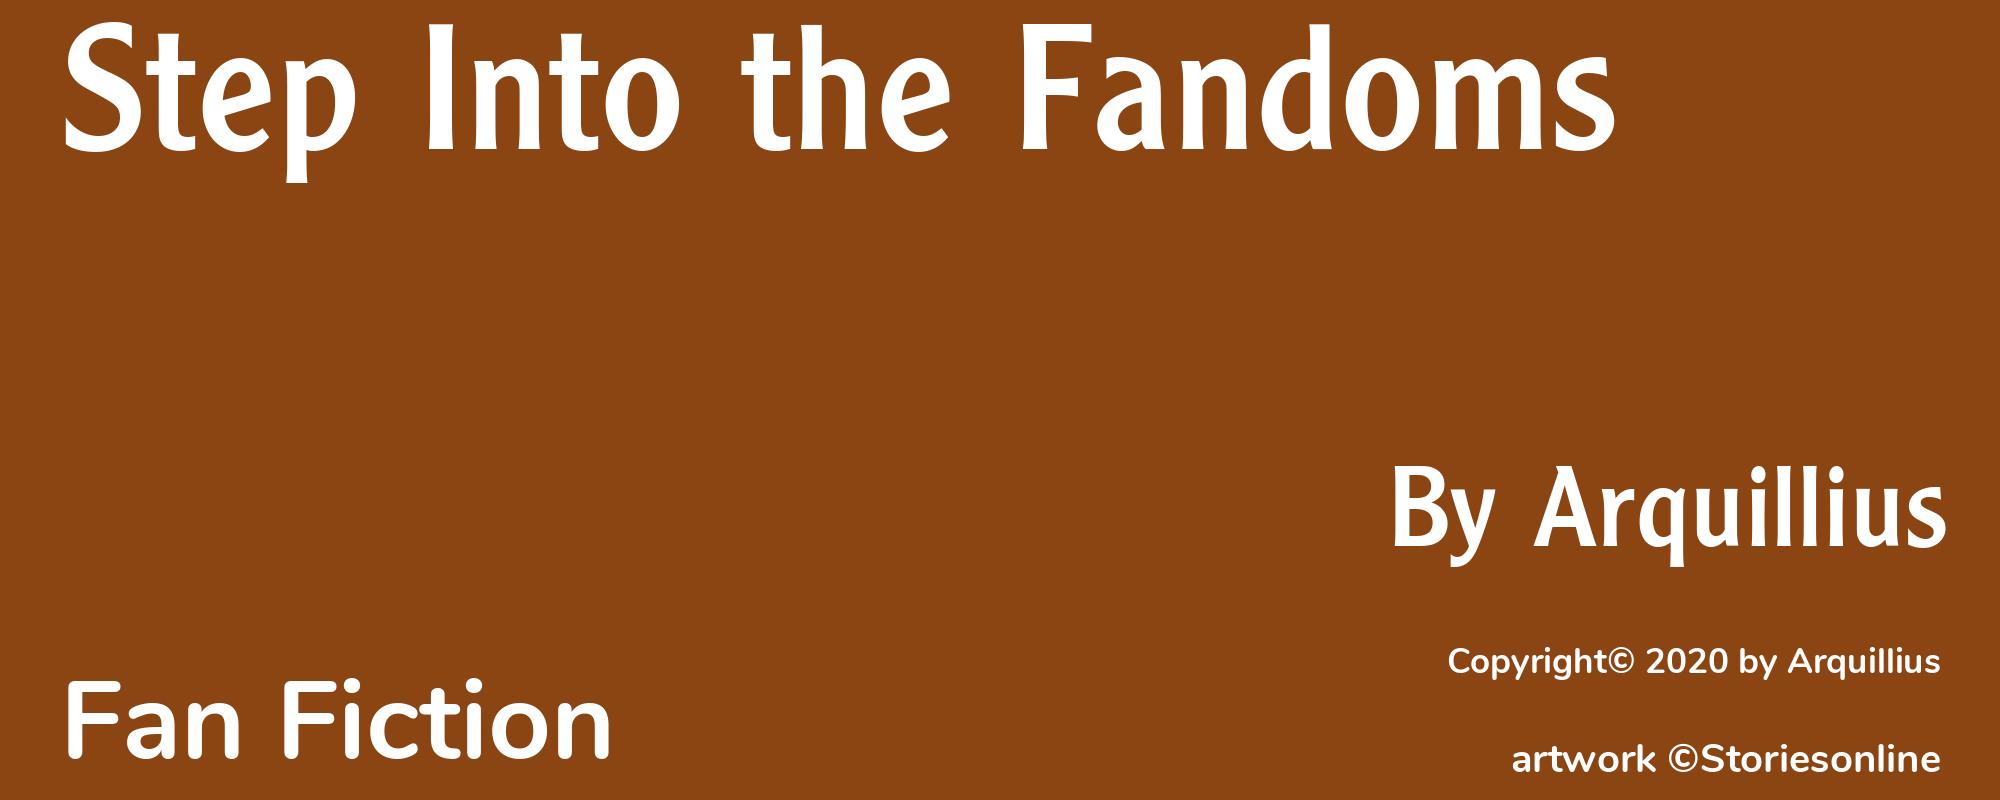 Step Into the Fandoms - Cover